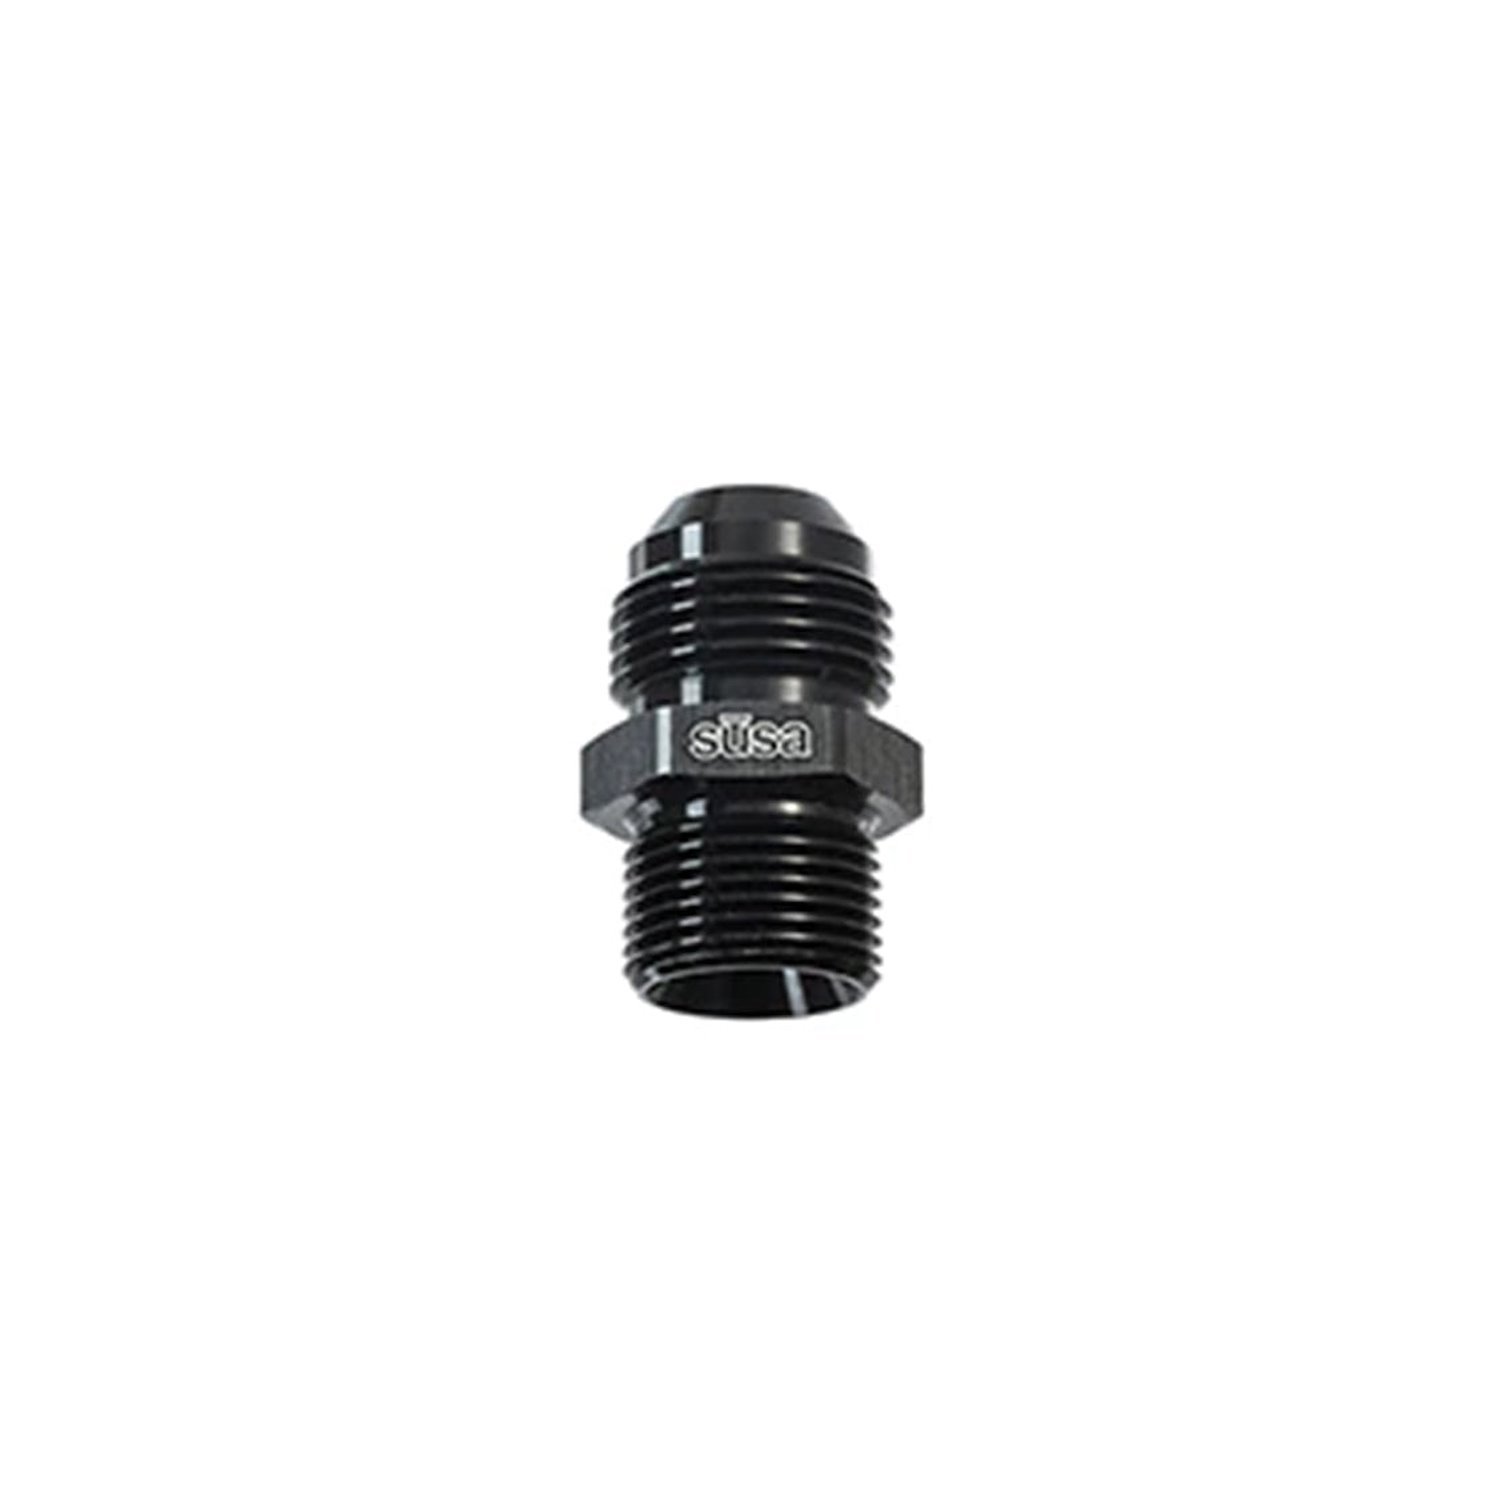 22-M20AN12-00 Adapter Fitting, M20 Male to AN12 Male, Straight